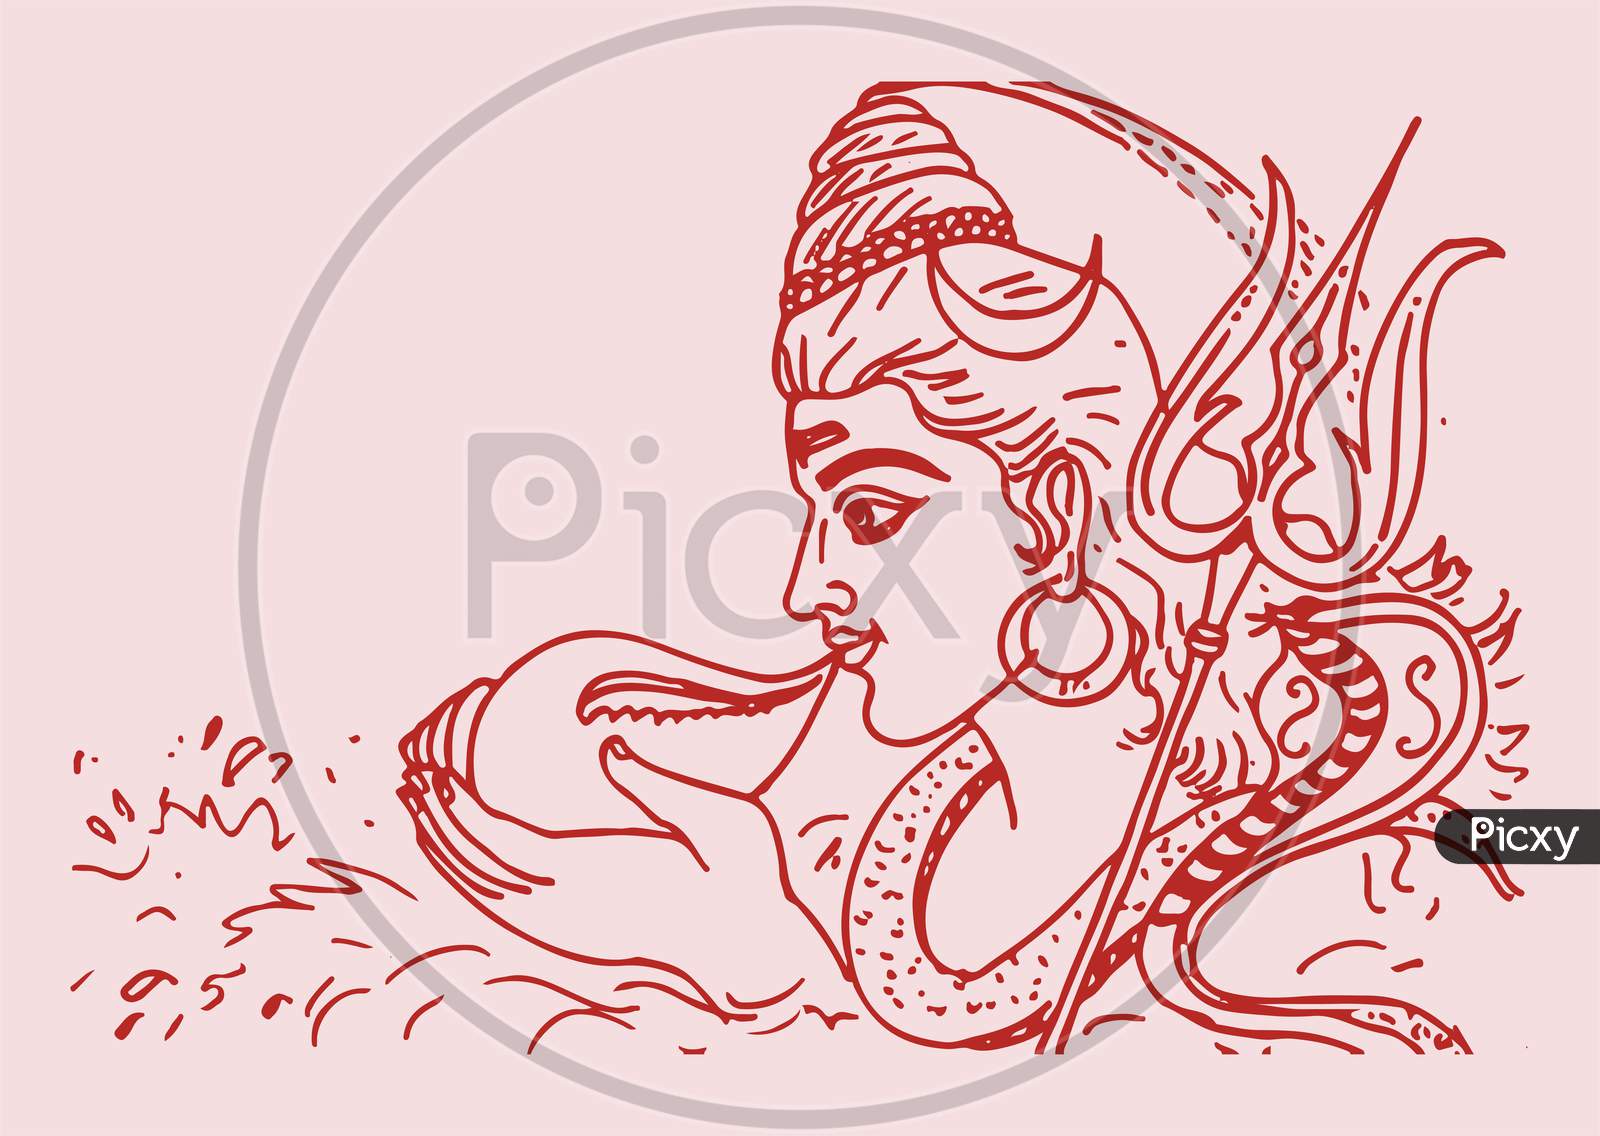 Lord shiva black and white calligraphic drawing Vector Image